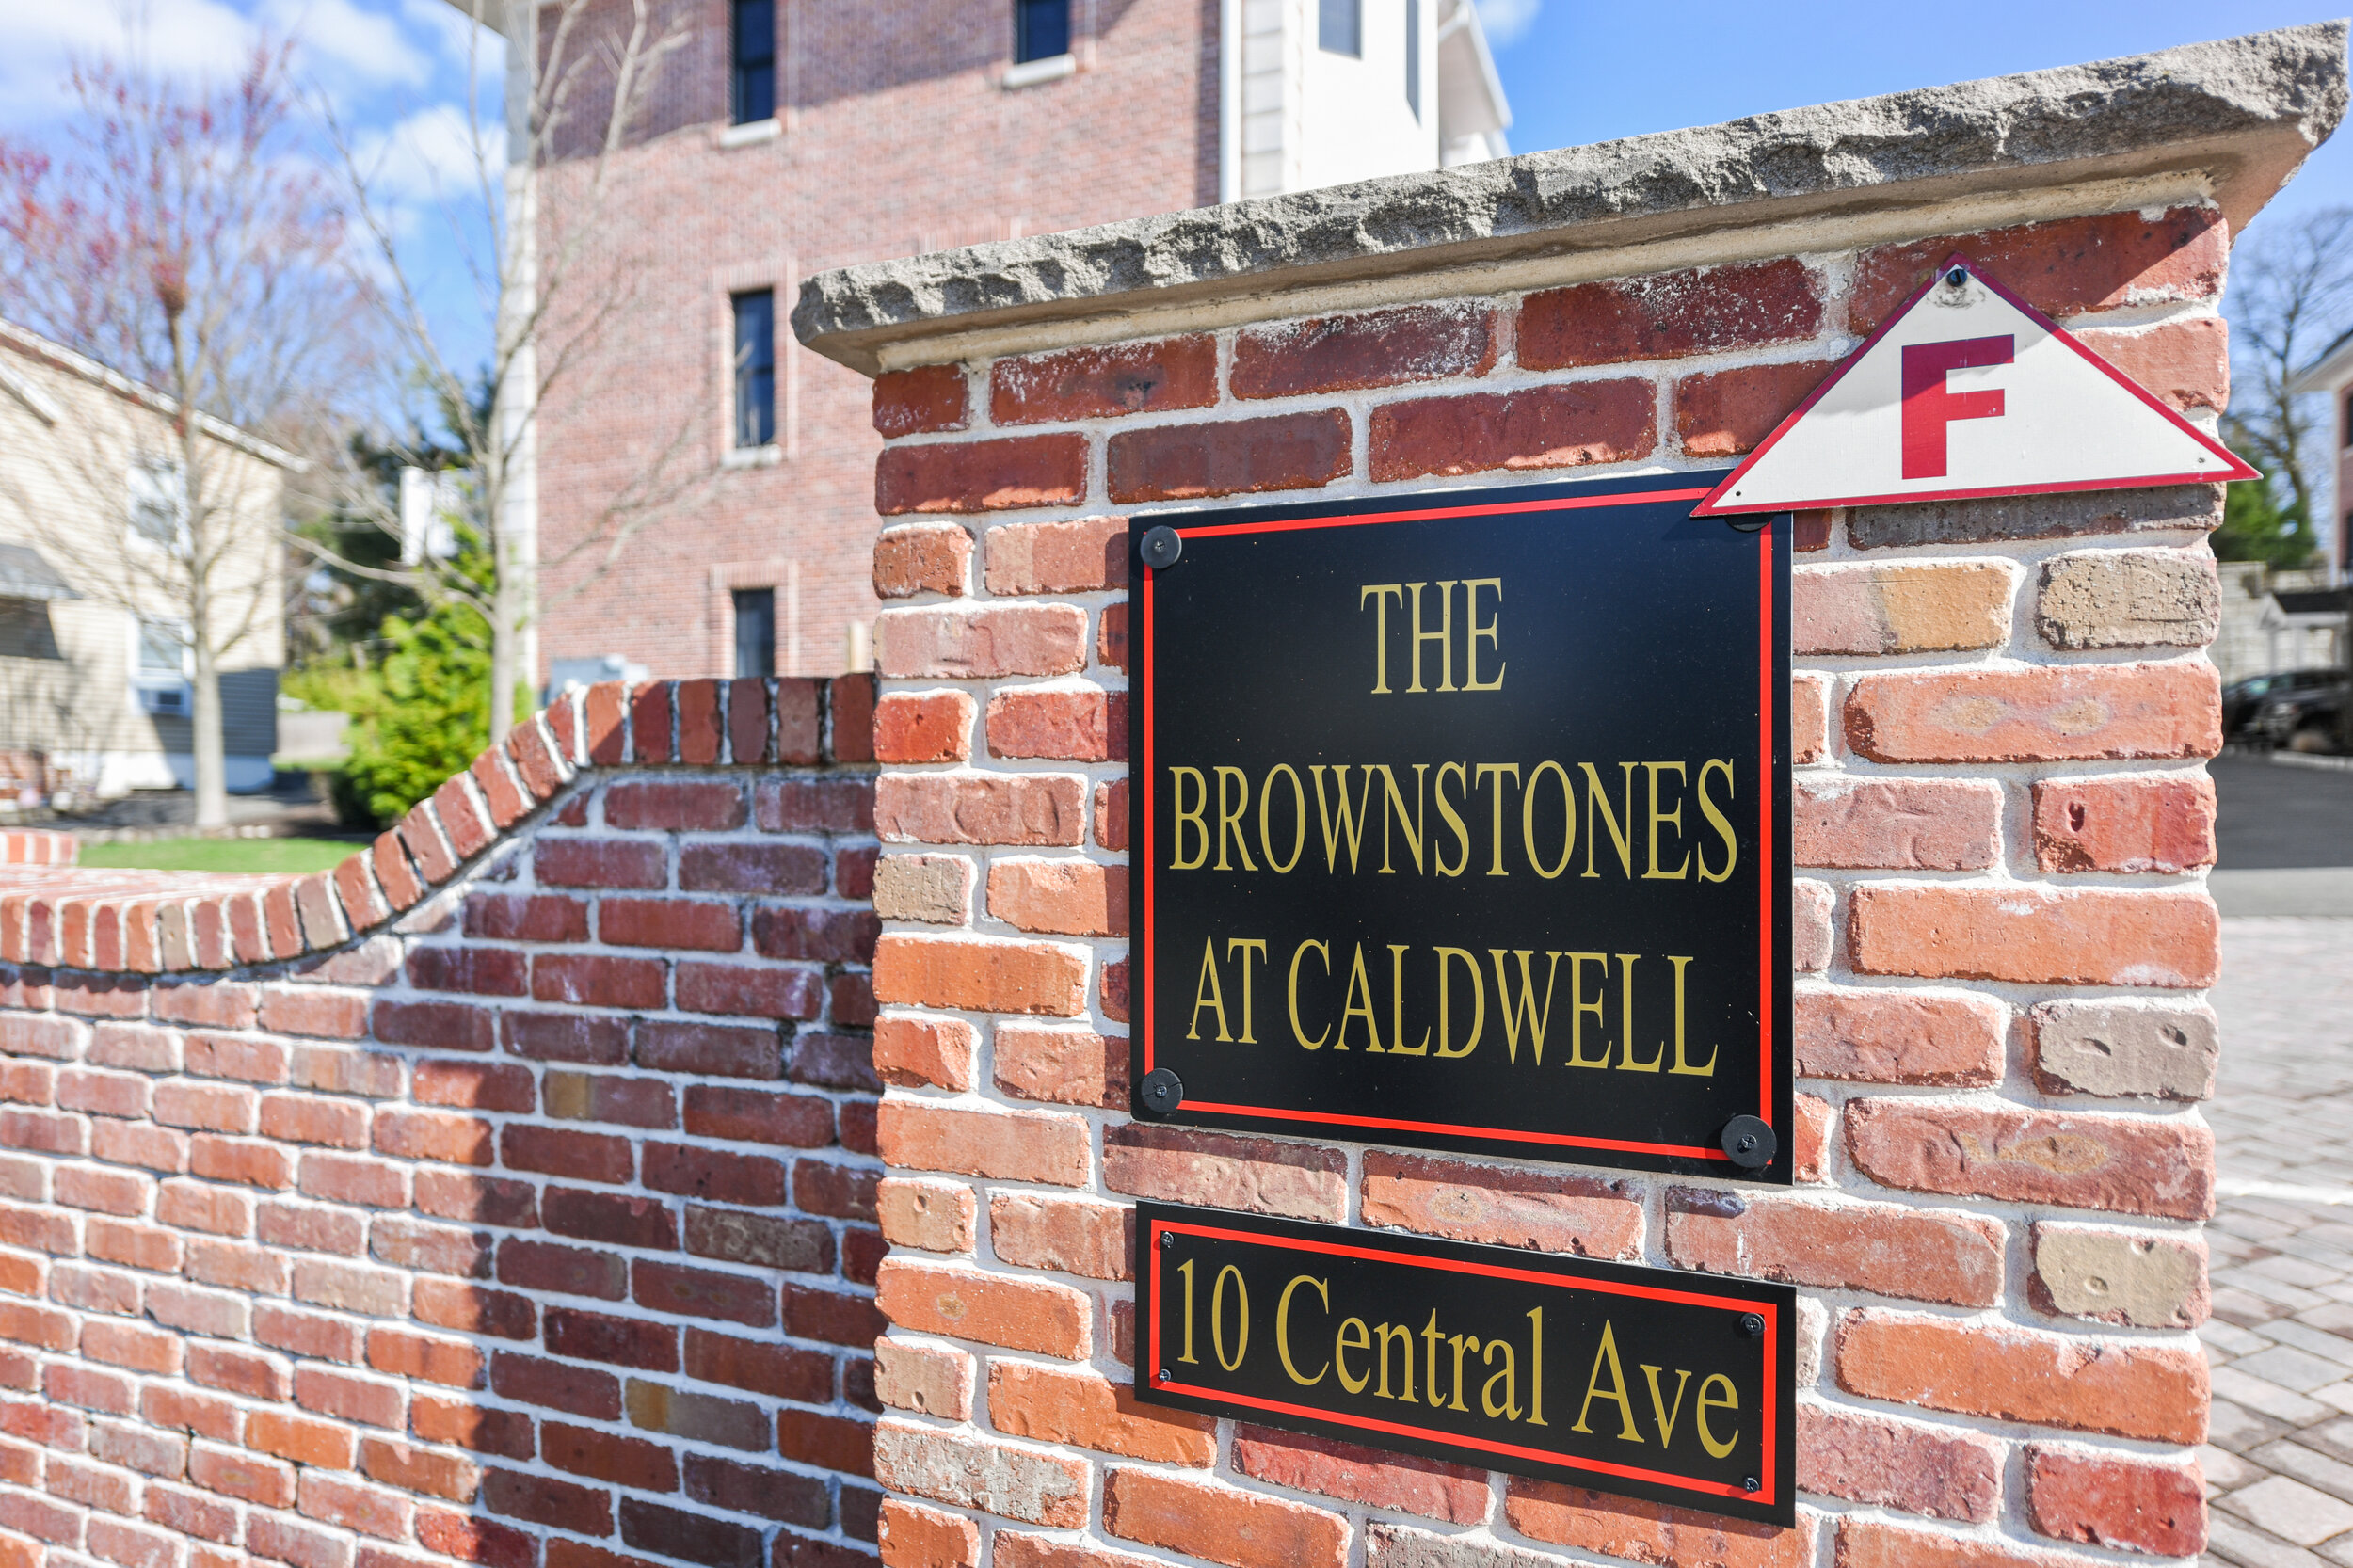 THE BROWNSTONES 10 CENTRAL AVE SIGN.jpg